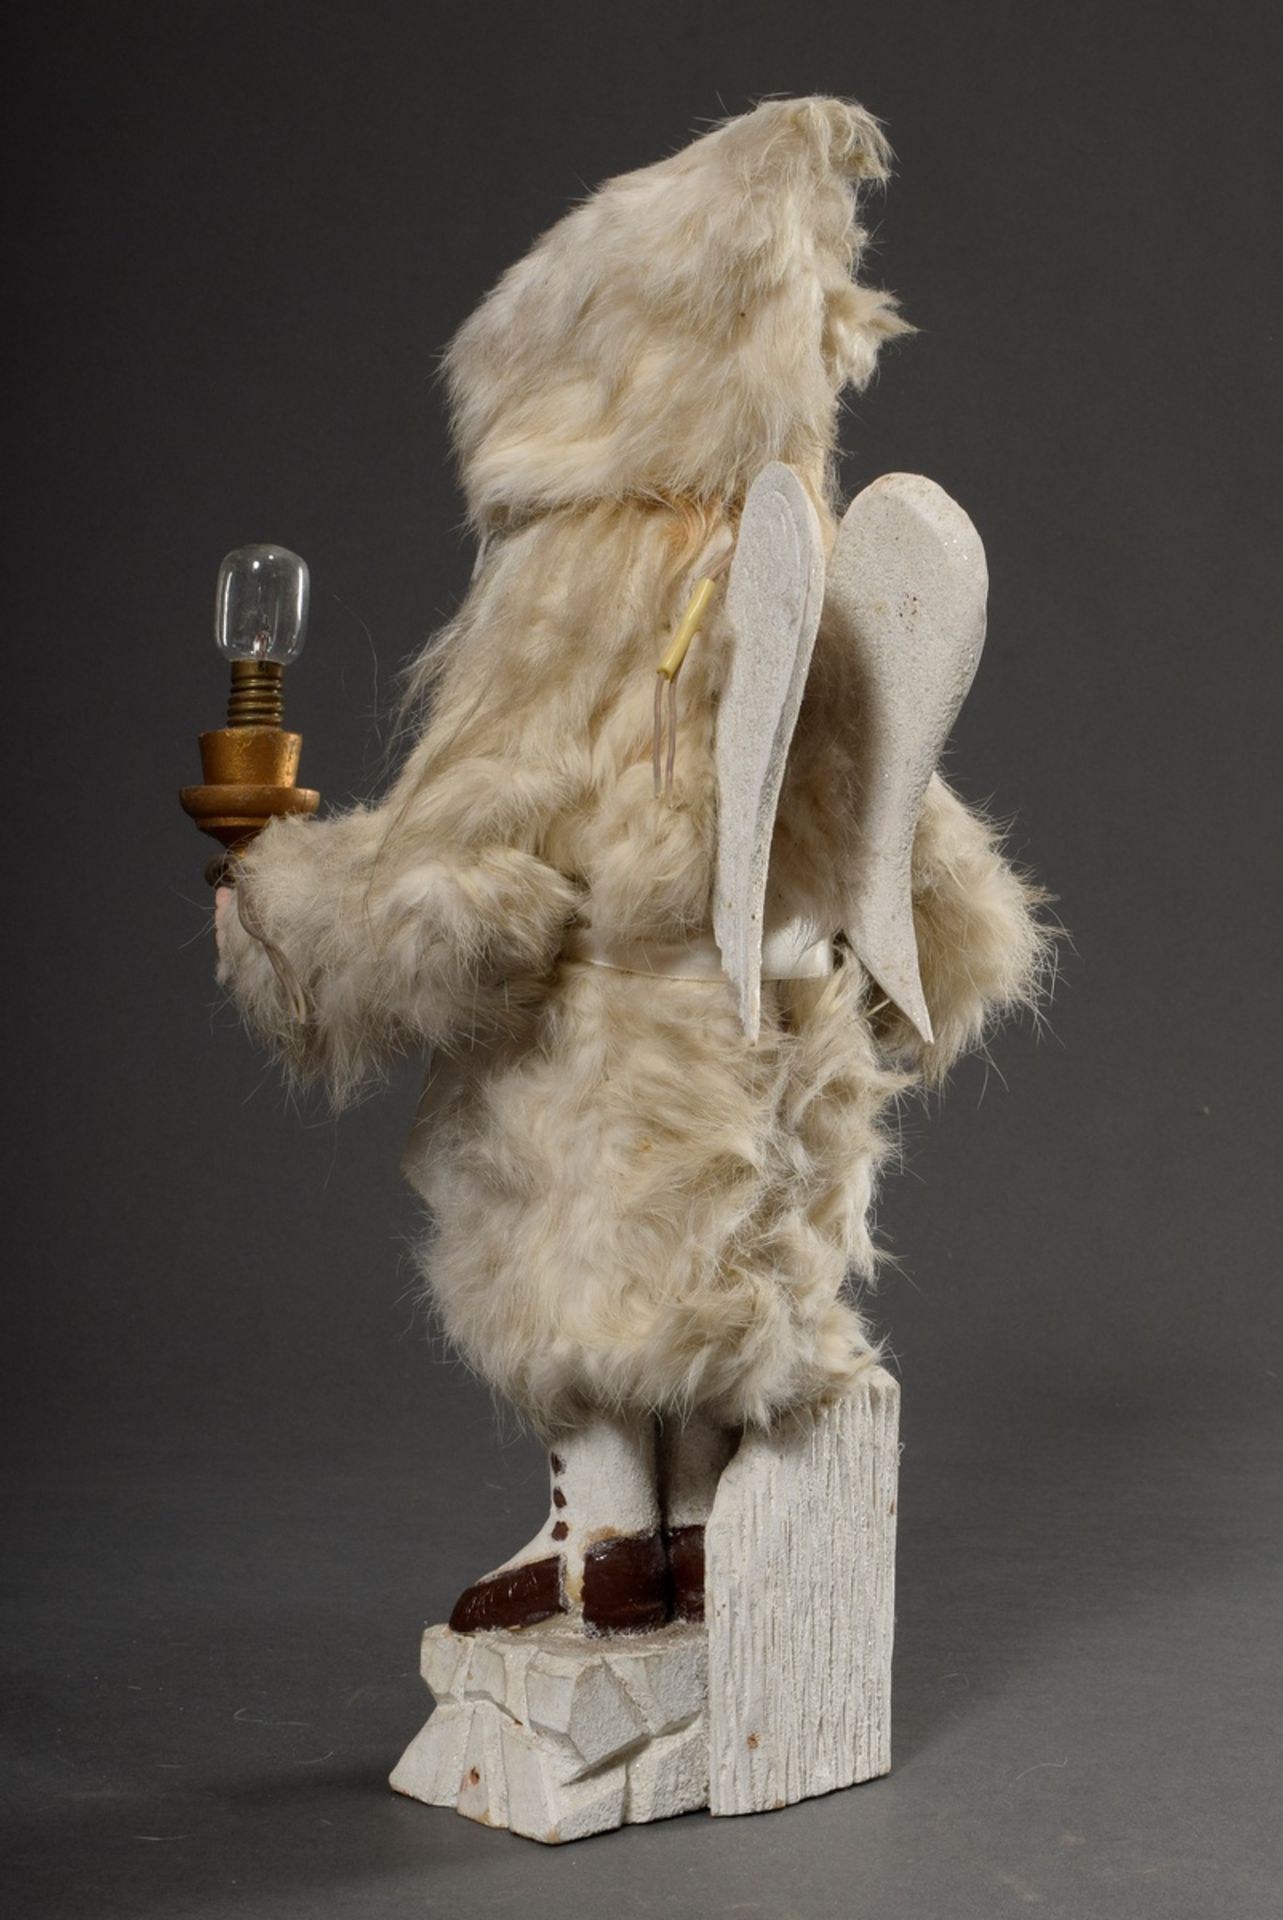 Lamp with "Winter Angel" doll, porcelain crank head and jointed body, real hair wig, glass eyes, op - Image 4 of 7